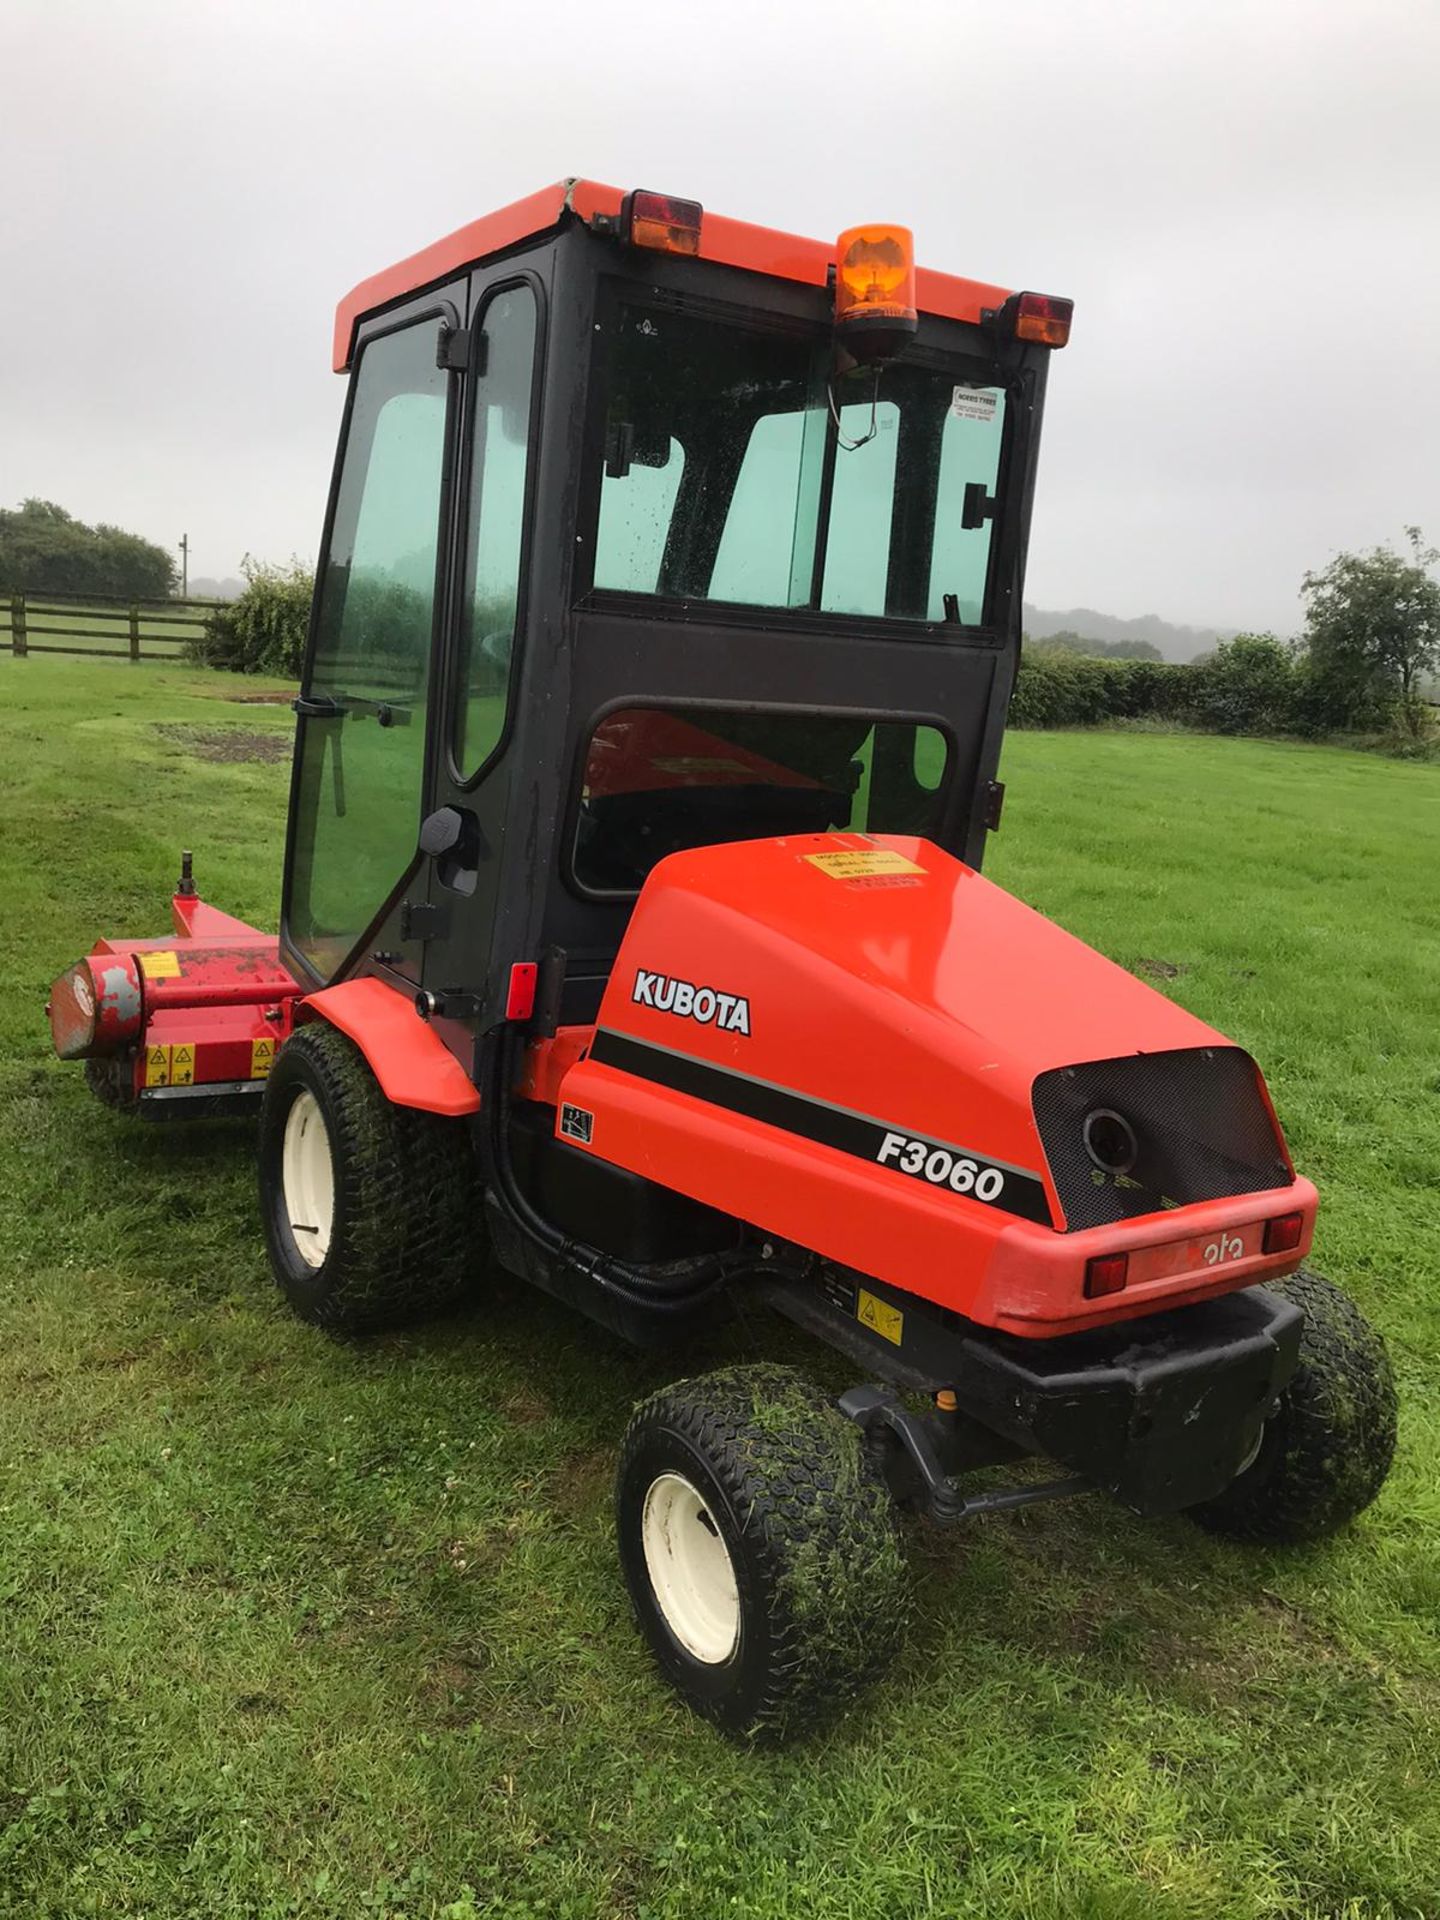 KUBOTA F3060 OUTFRONT FLAIL DECK LAWN MOWER WITH FULL GLASS CAB, RUNS, DRIVES AND CUTS *PLUS VAT* - Image 3 of 4